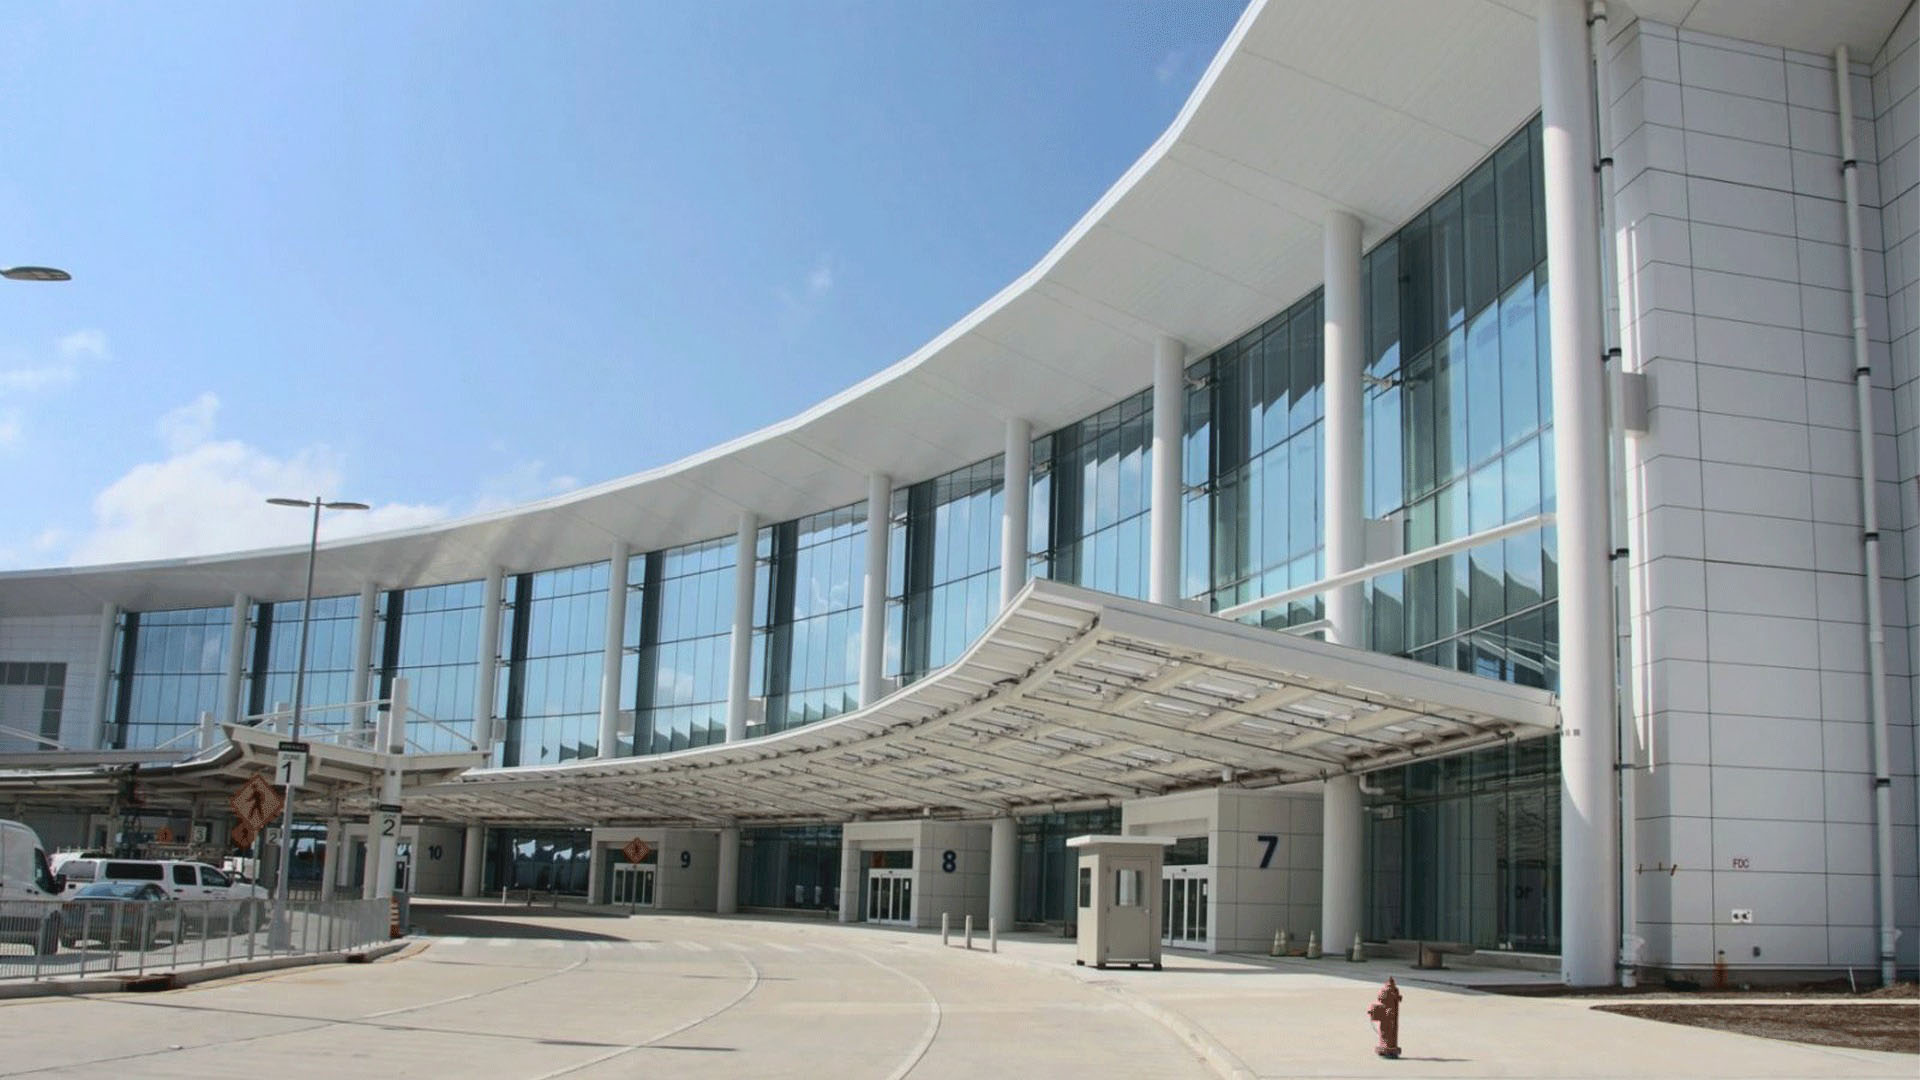 Atkins: louis armstrong new orleans international airport, usa - revamped terminal by atkins and leo a daly, replacing the outdated 1959 terminal. © atkins